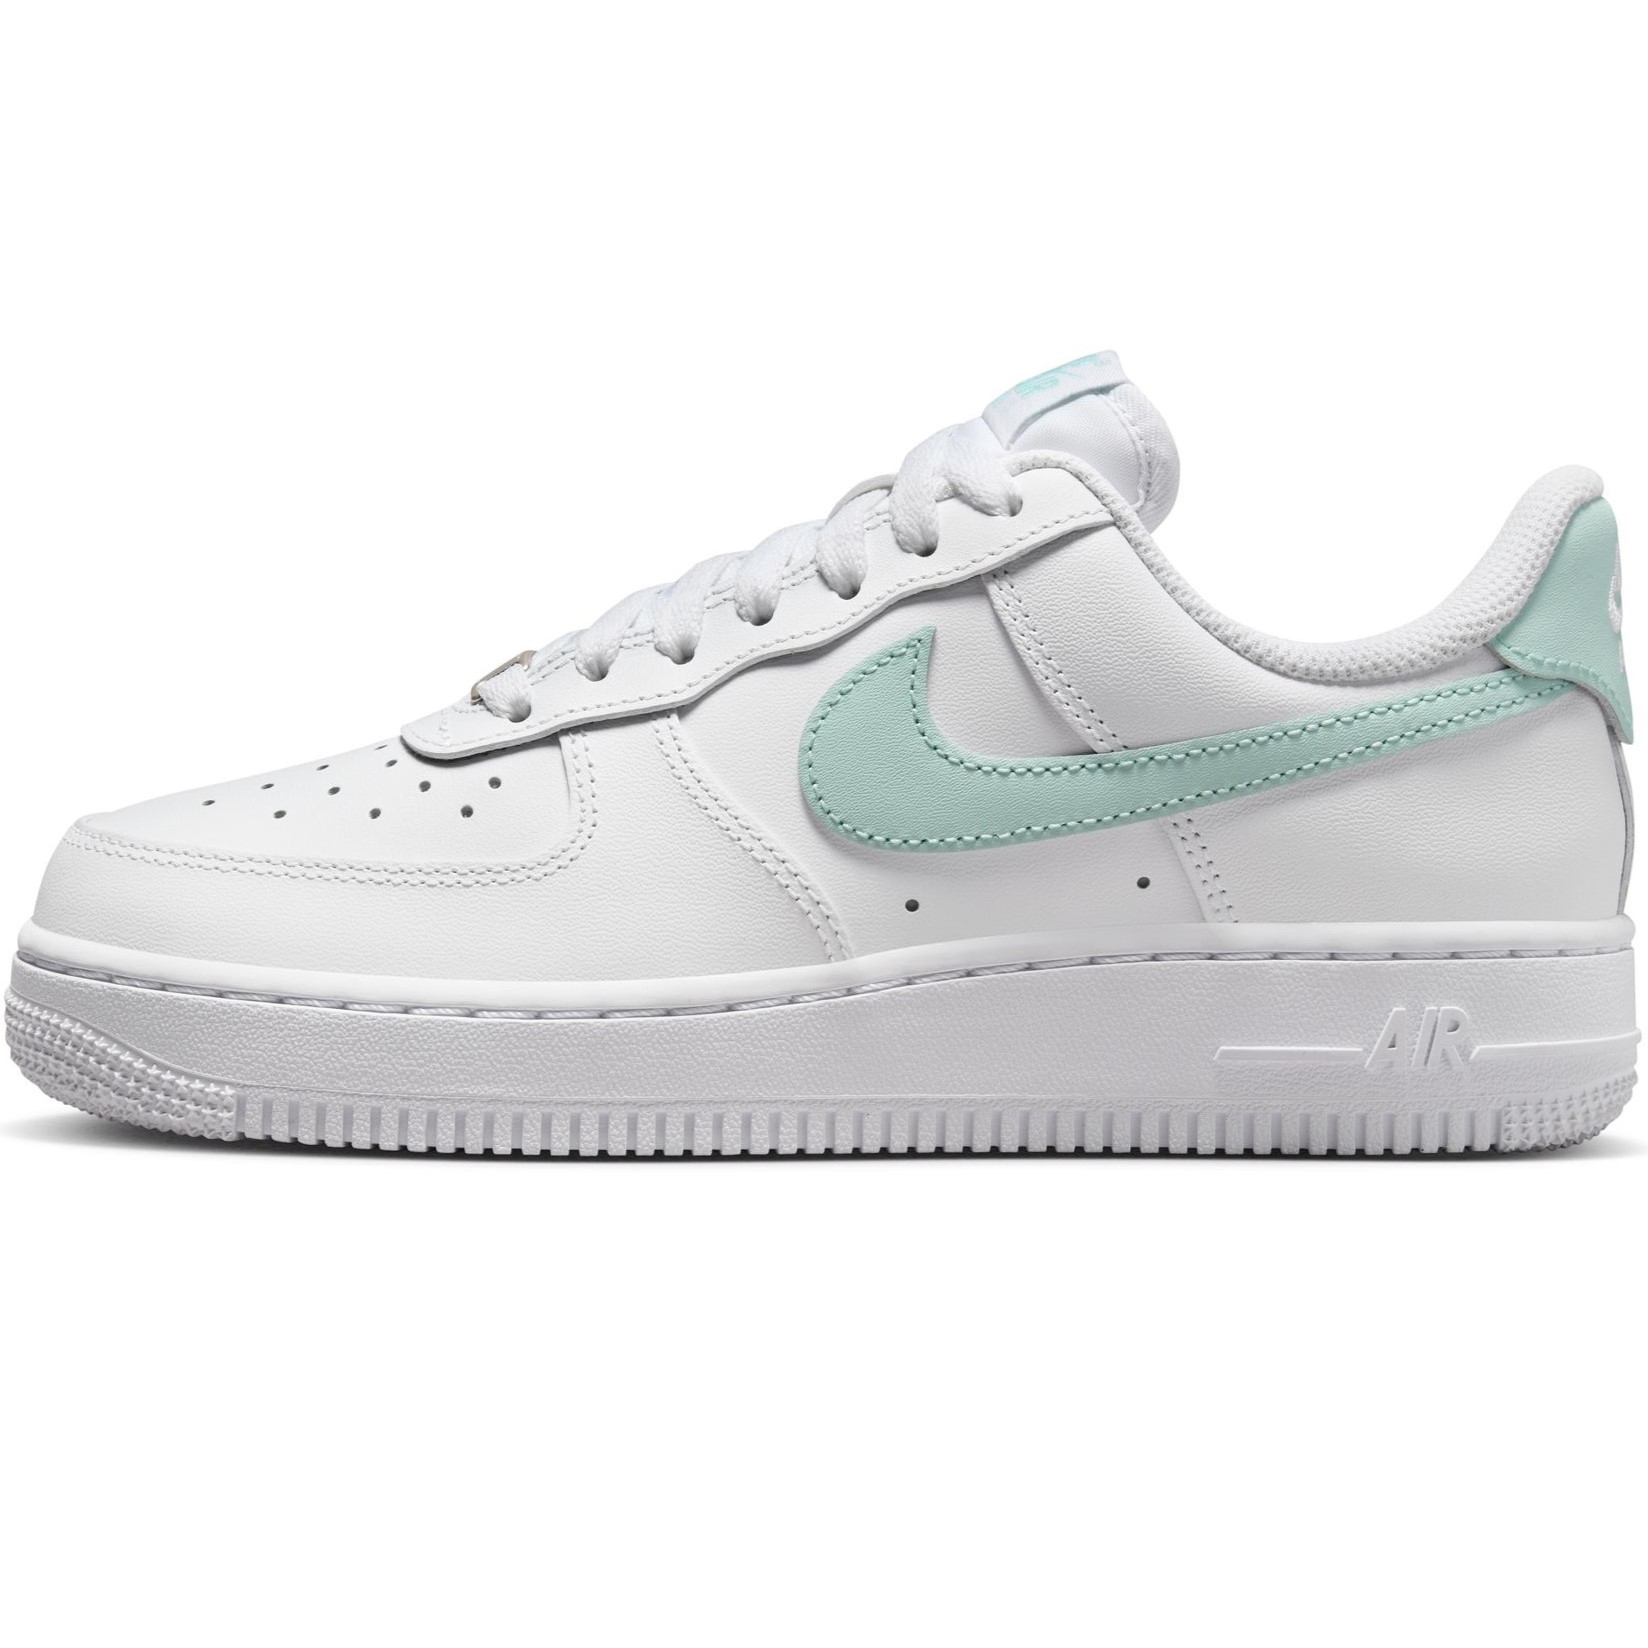 GIÀY THỂ THAO NIKE NỮ AIR FORCE 1 07 EASYON WHITE ICE JADE WOMENS SHOES DX5883-101 4